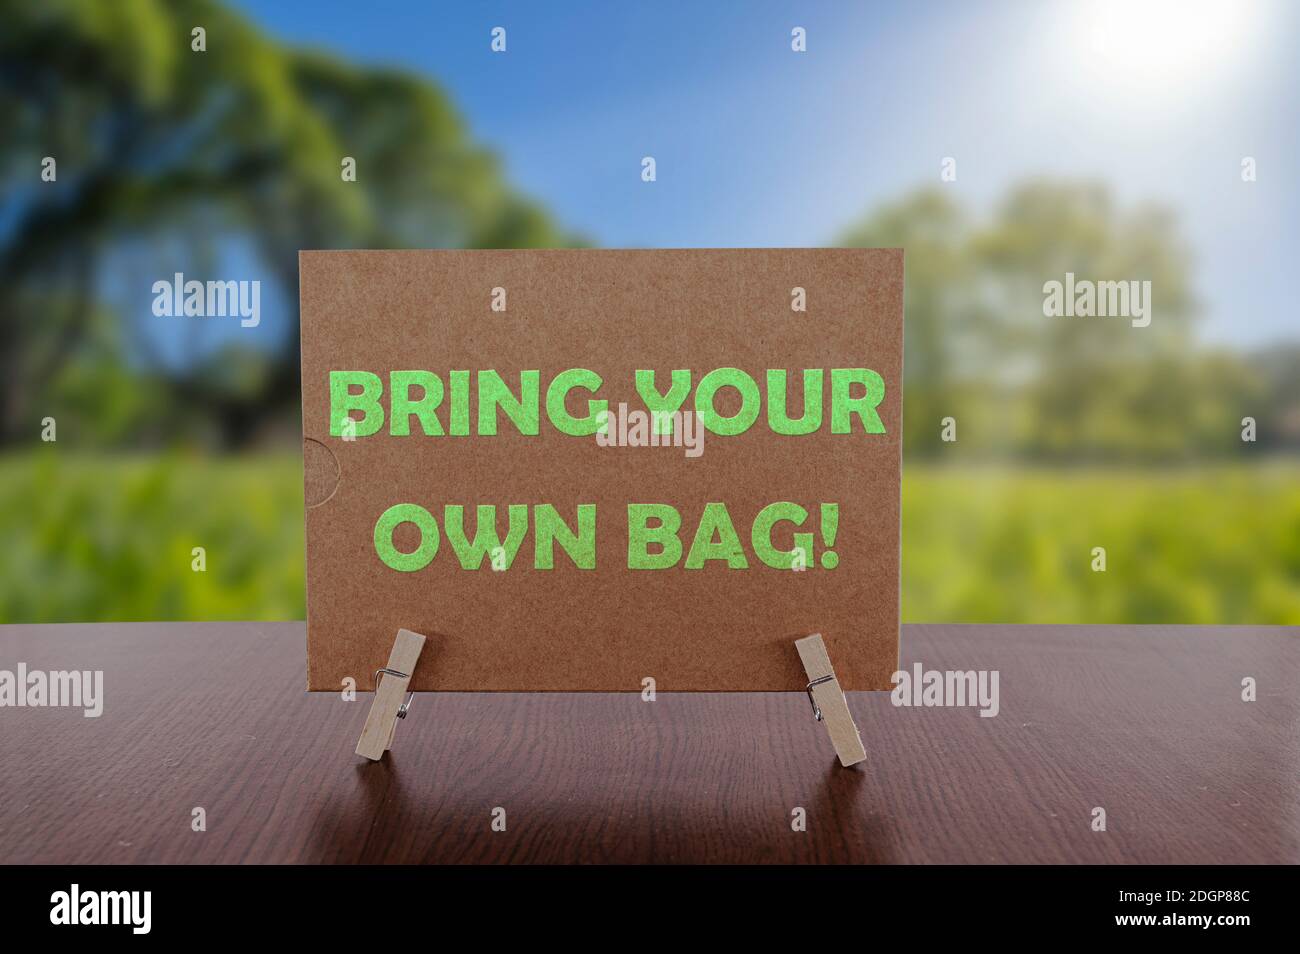 Bring your own bag text on card on the table with sunny green park background. Ecology concept, recycle, reuse, reduce waste. Stock Photo